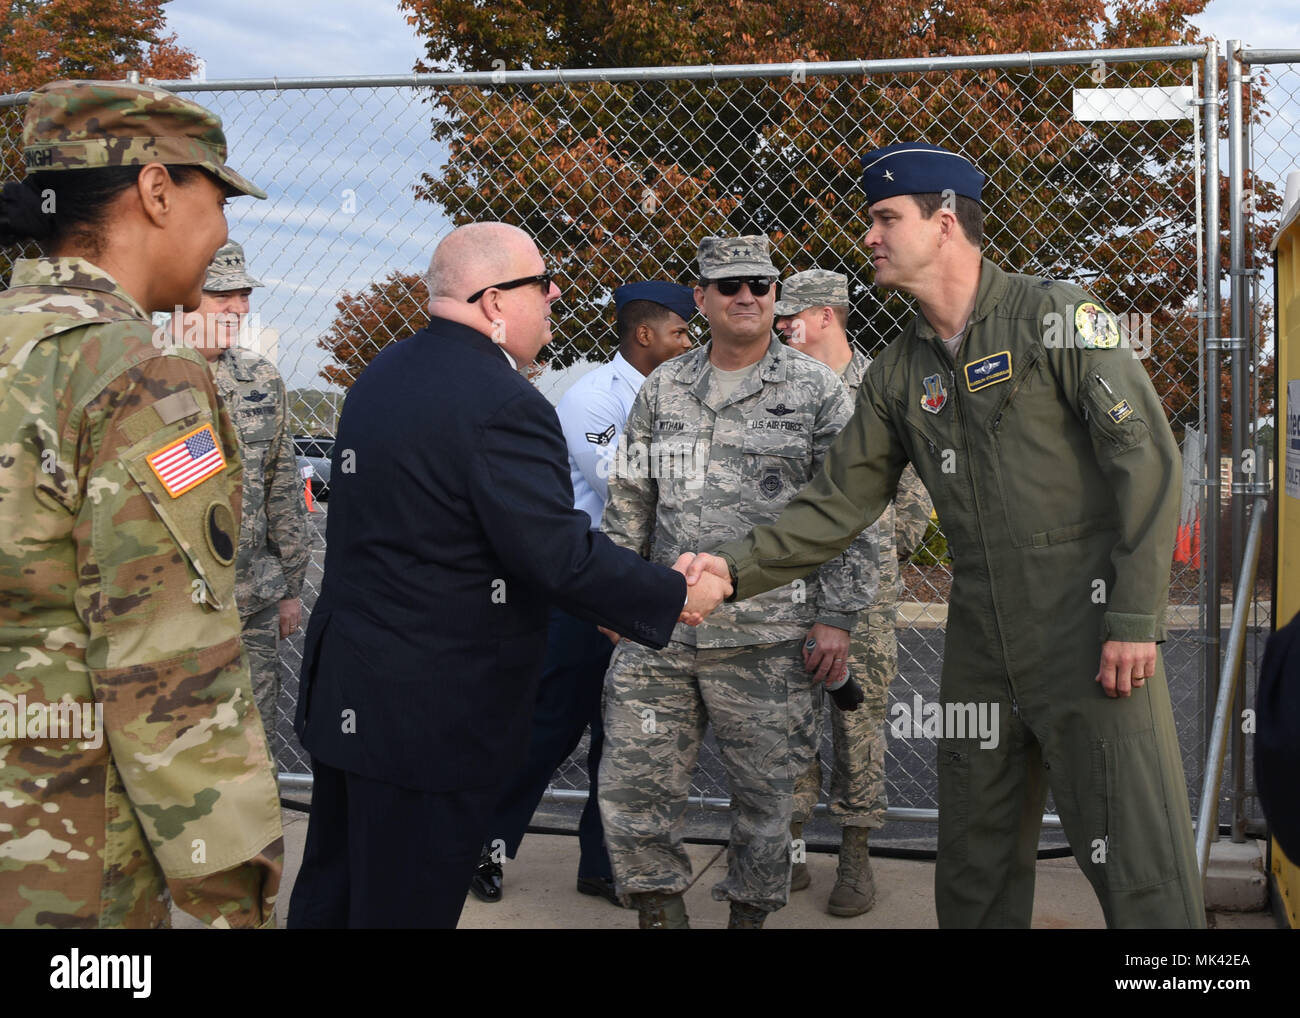 Gen. Randolph Staudenraus welcomes Maryland Gov. Larry Hogan to the 175th Cyberspace Operations Squadron groundbreaking ceremony Nov. 2, 2017 at Fort George G. Meade, Maryland. Hogan was the keynote speaker at the even that marked the initial construction of the structure that will provide closer integration between the ANG and U.S. Cyber Command. (U.S. Air National Guard photo by Senior Airman Enjoli Saunders) Stock Photo